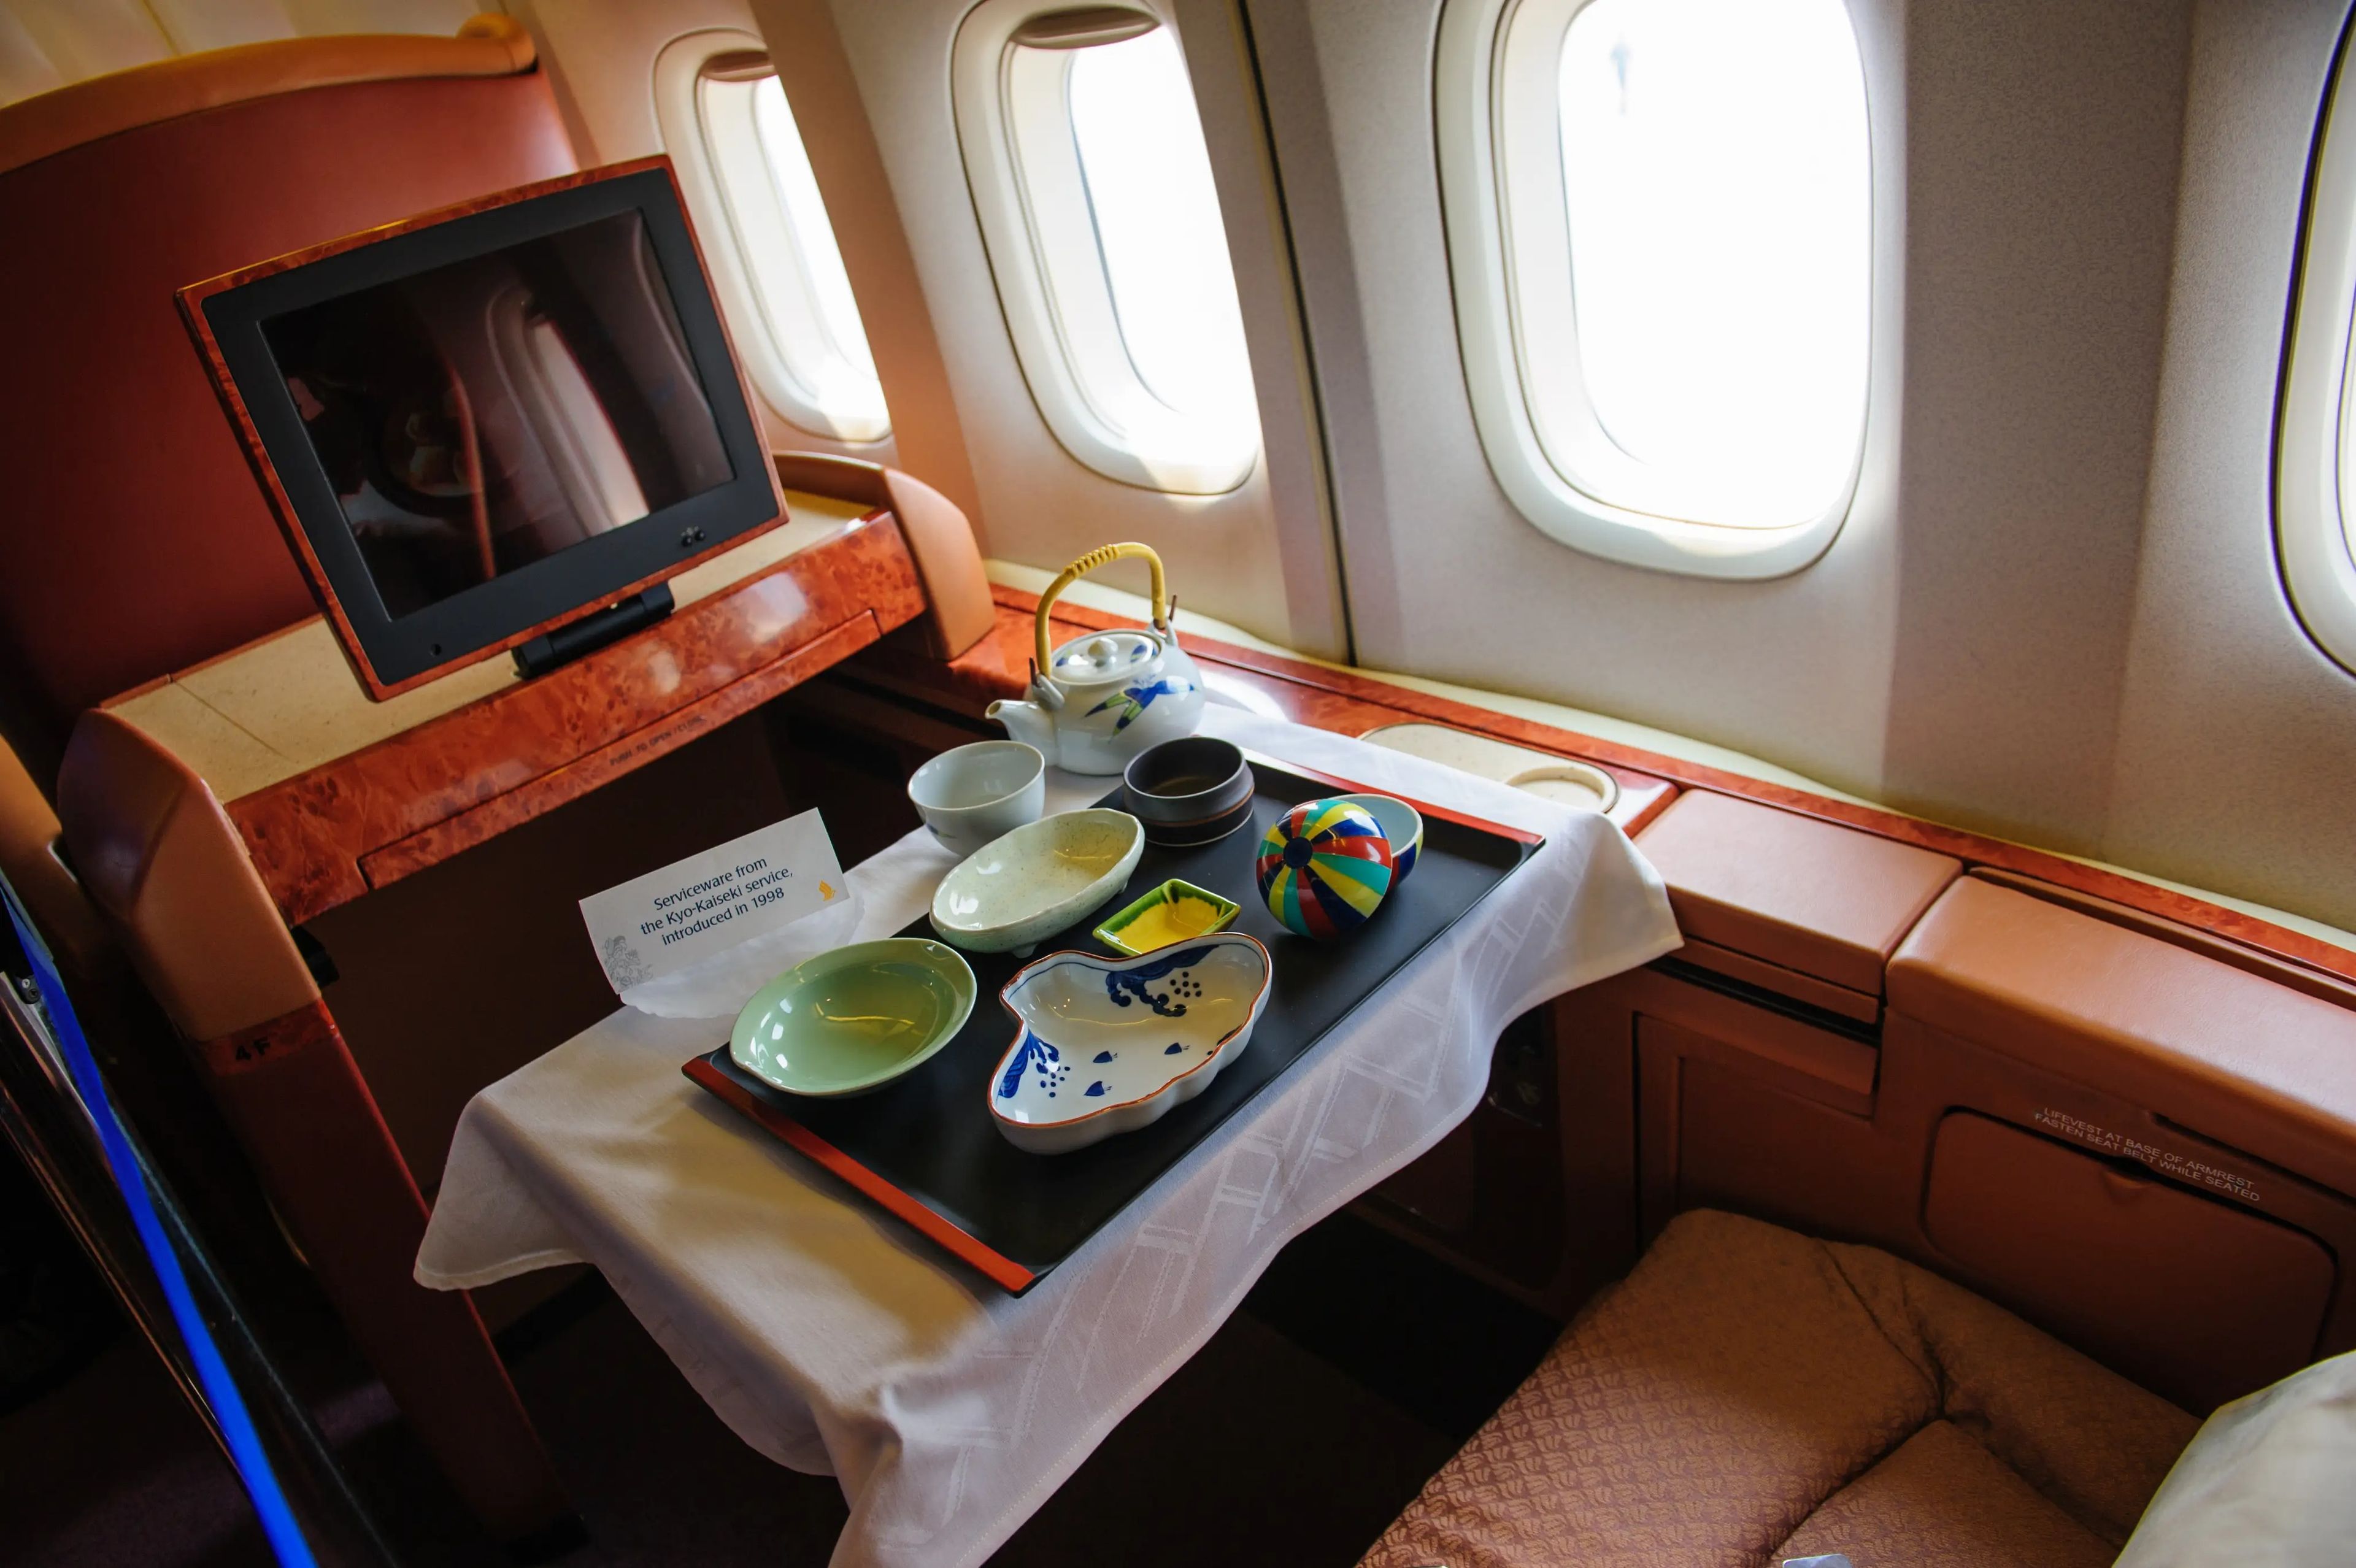 Singapore Airlines first class cabin.